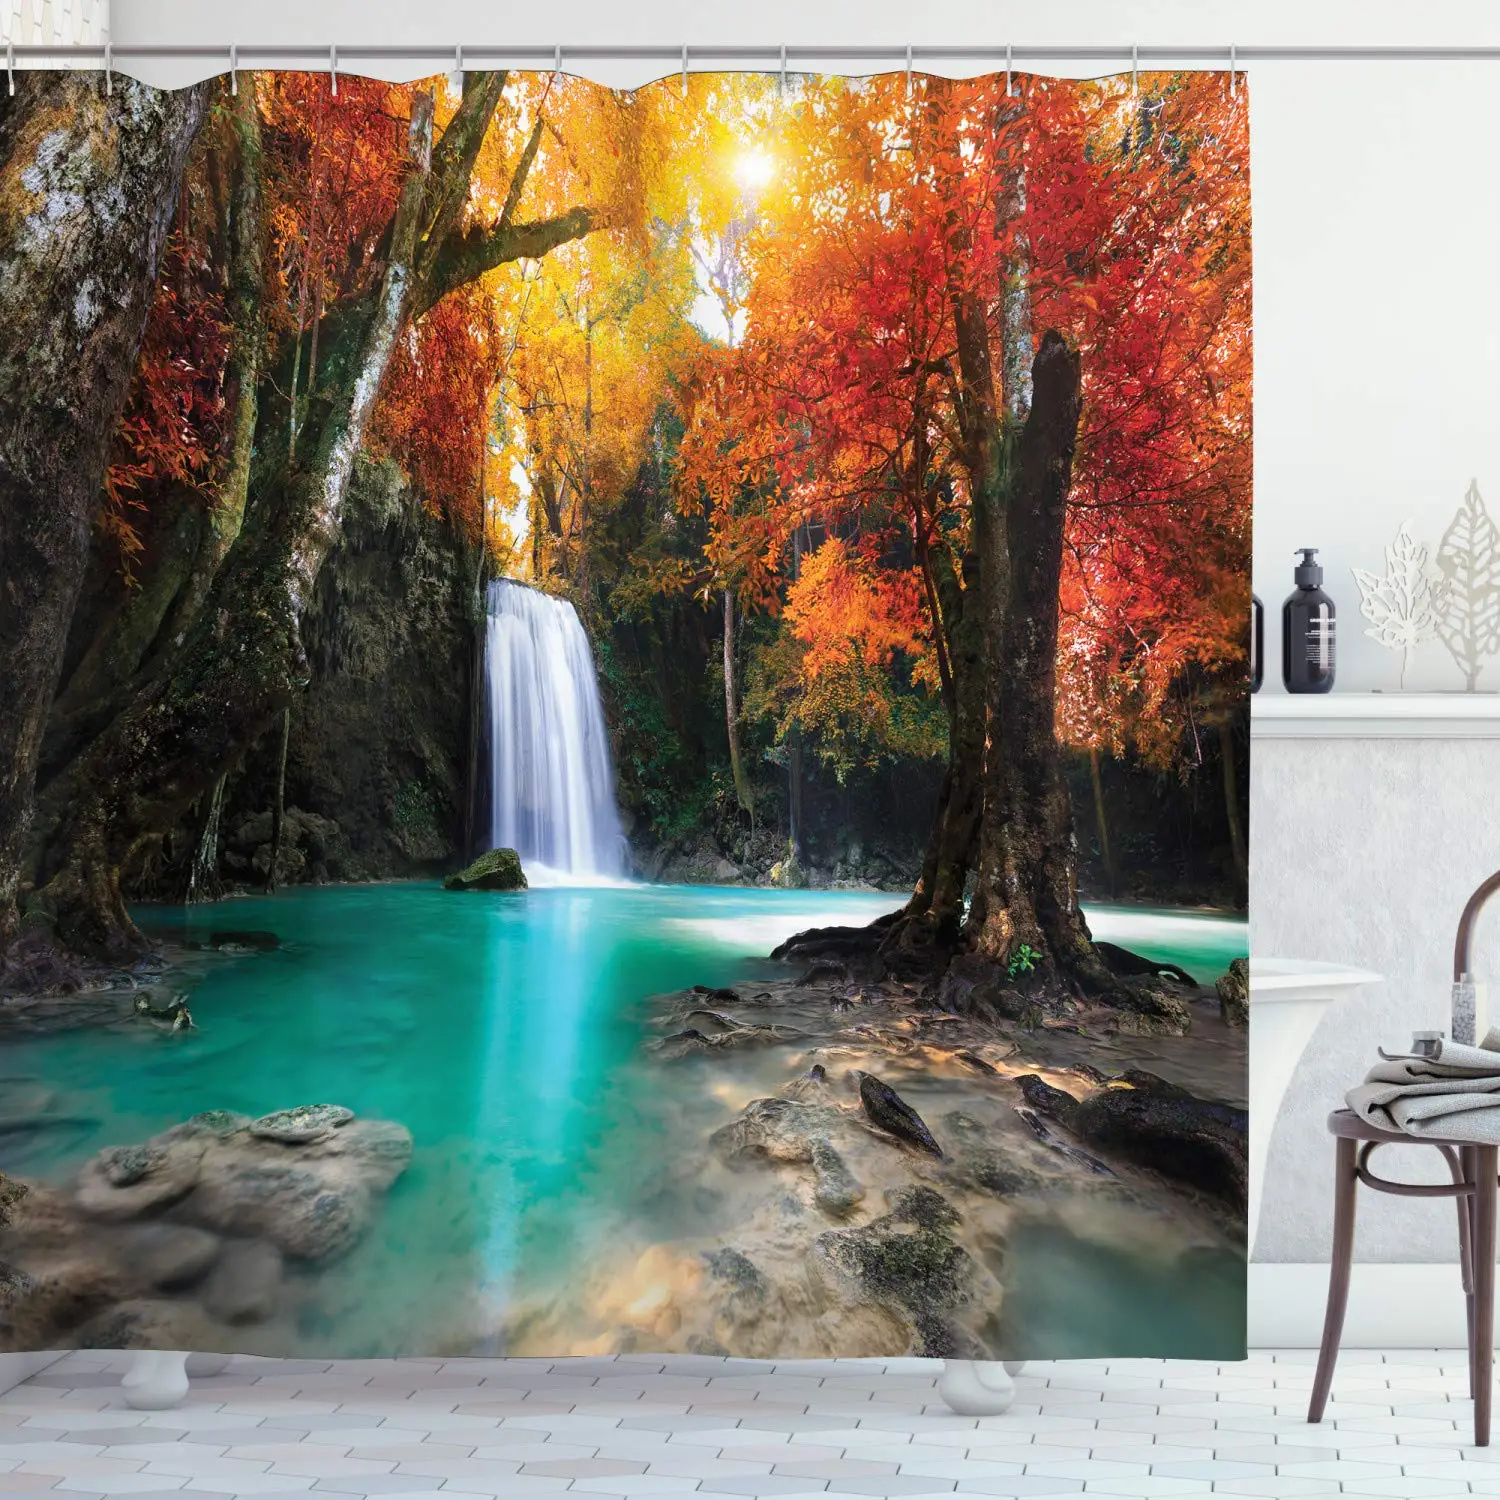 Polyester Fabric Bathroom Shower Curtain Set with Hooks Paprika Turquoise Ivory 60x72 Deep Forest Waterfall Runoff Autumn Forest Image Pattern Yeuss Waterfall Decor Collection